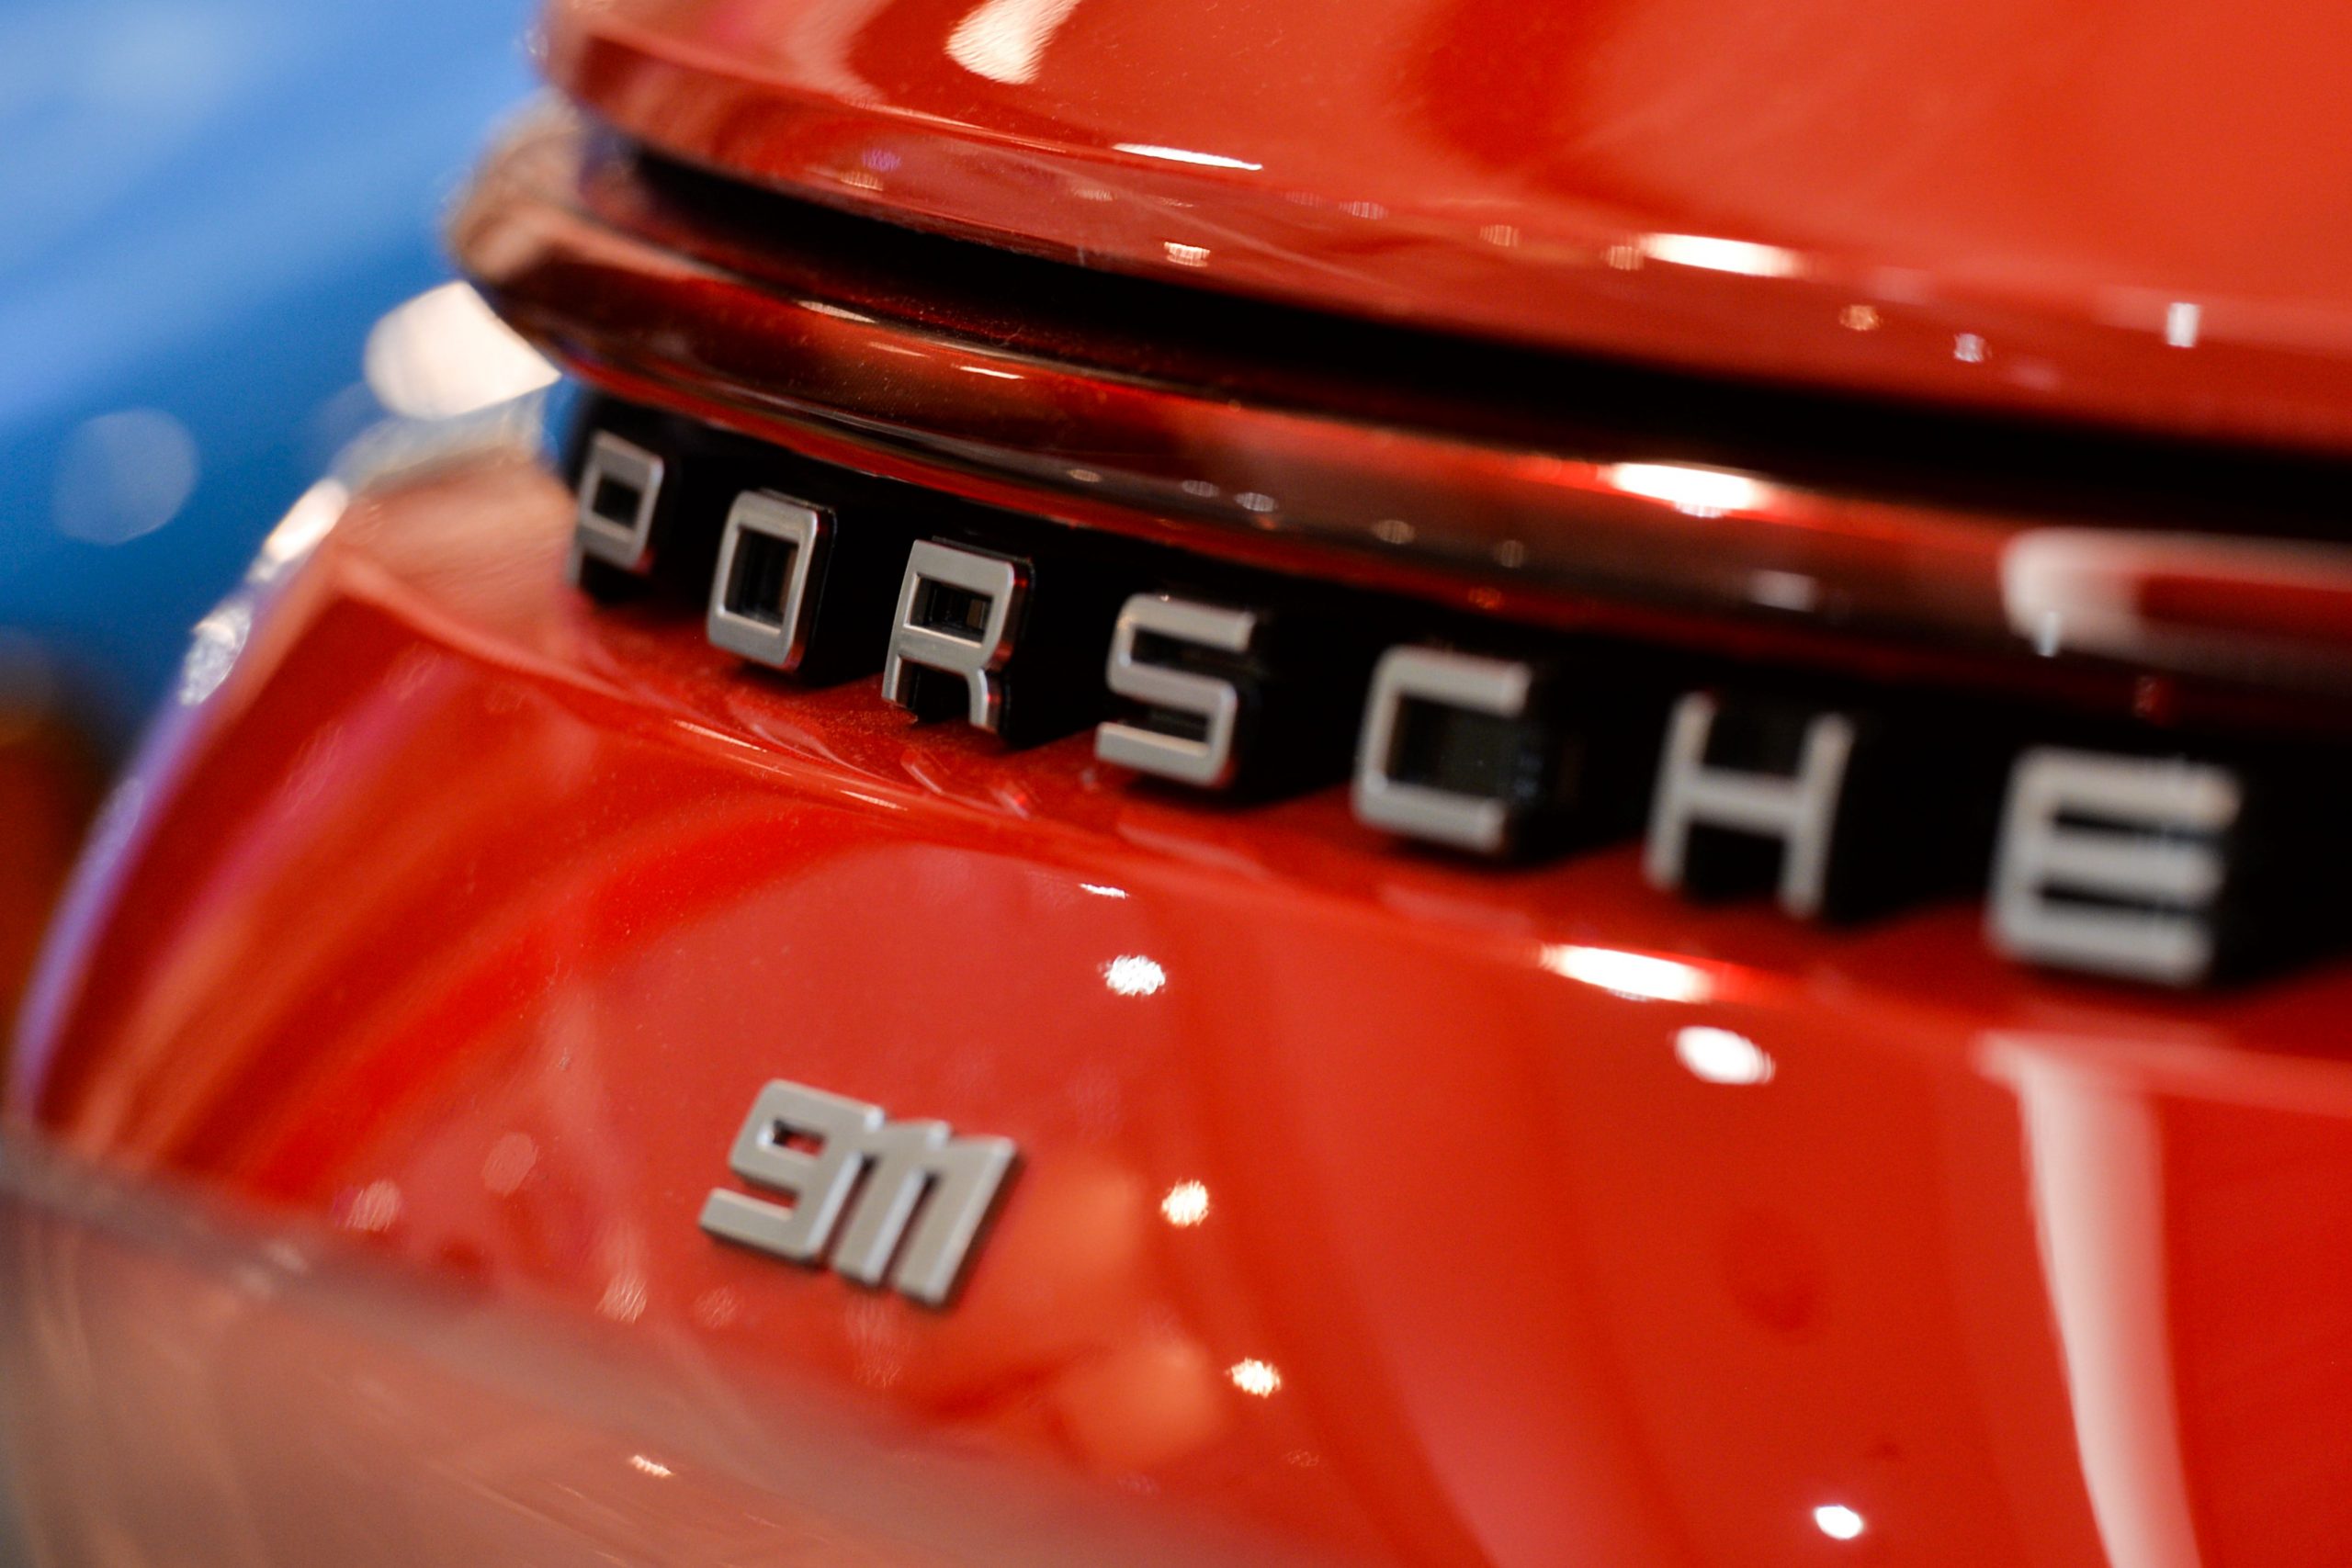 A Porsche 911 logo on the back of a red car. 